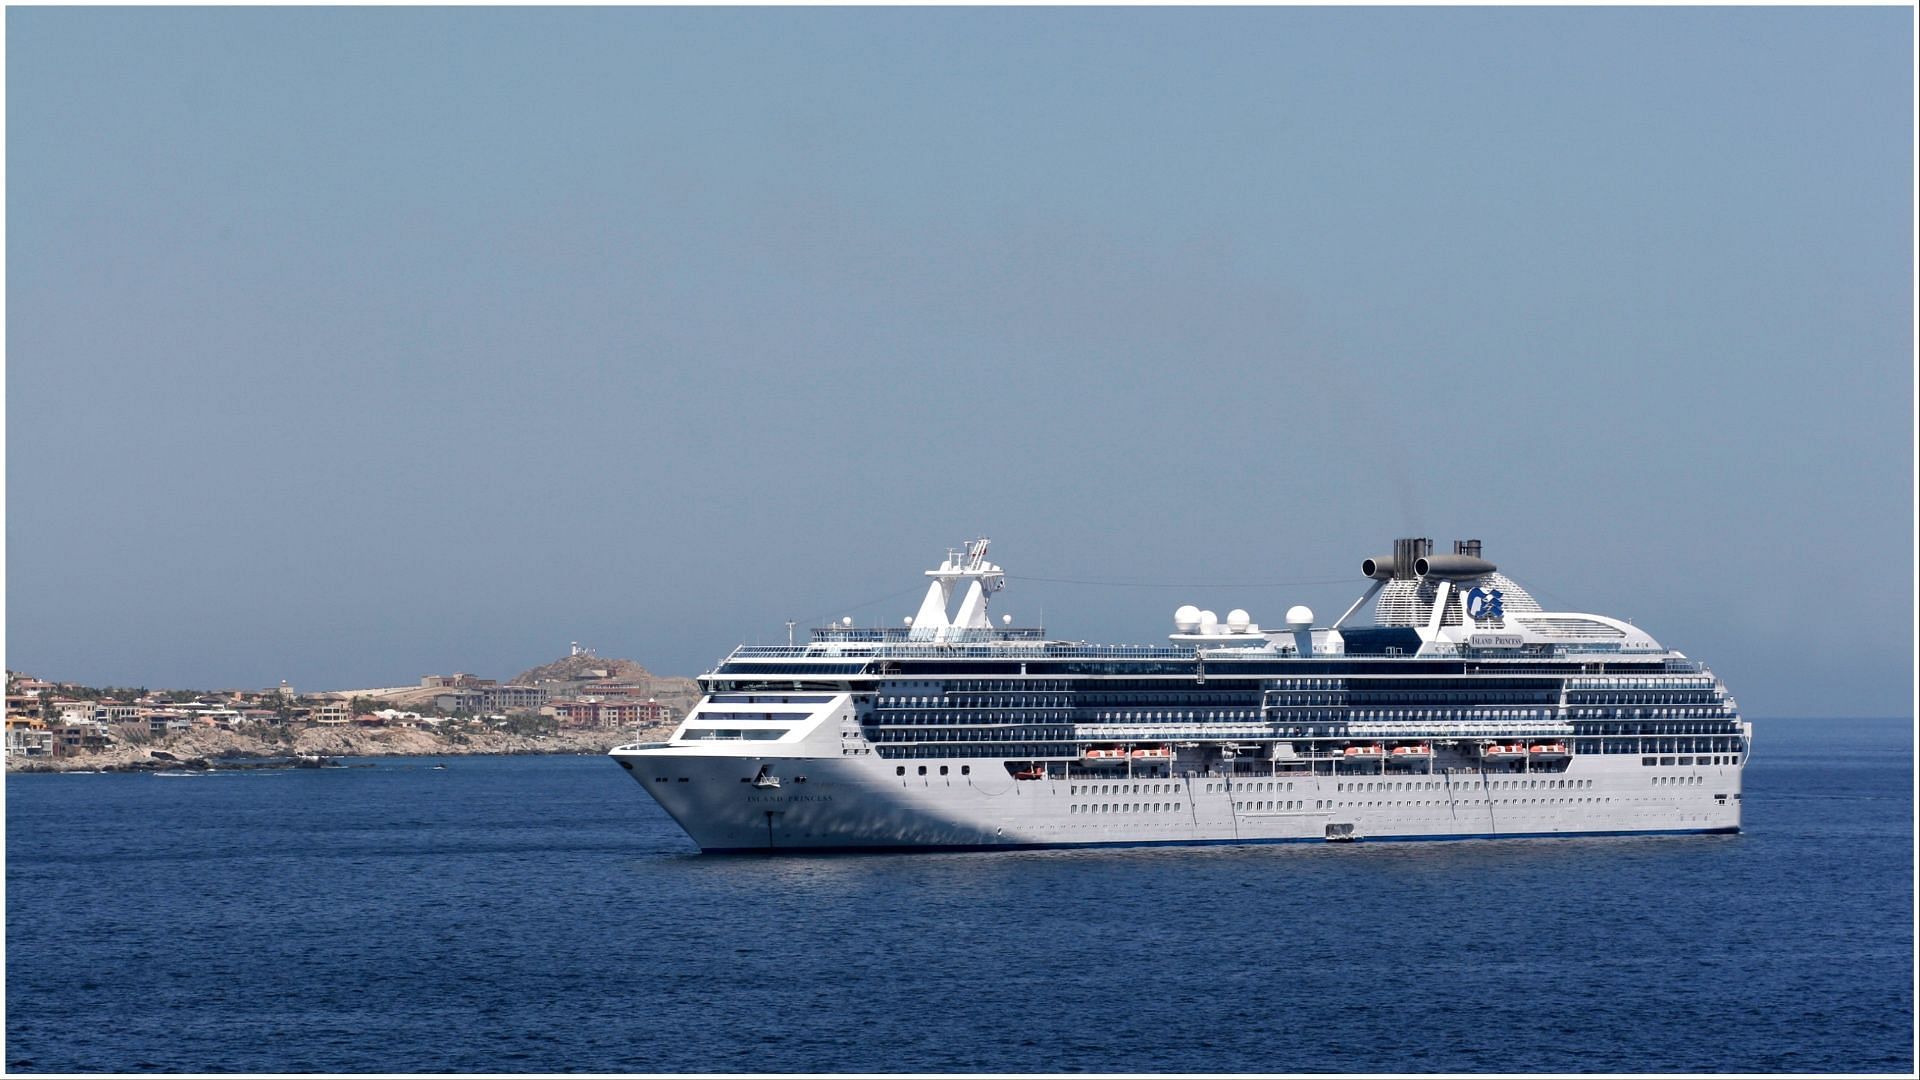 CDC officials claims to record the highest number of outbreaks on cruise ships. (Image via Bruno Castelli/Pexels)